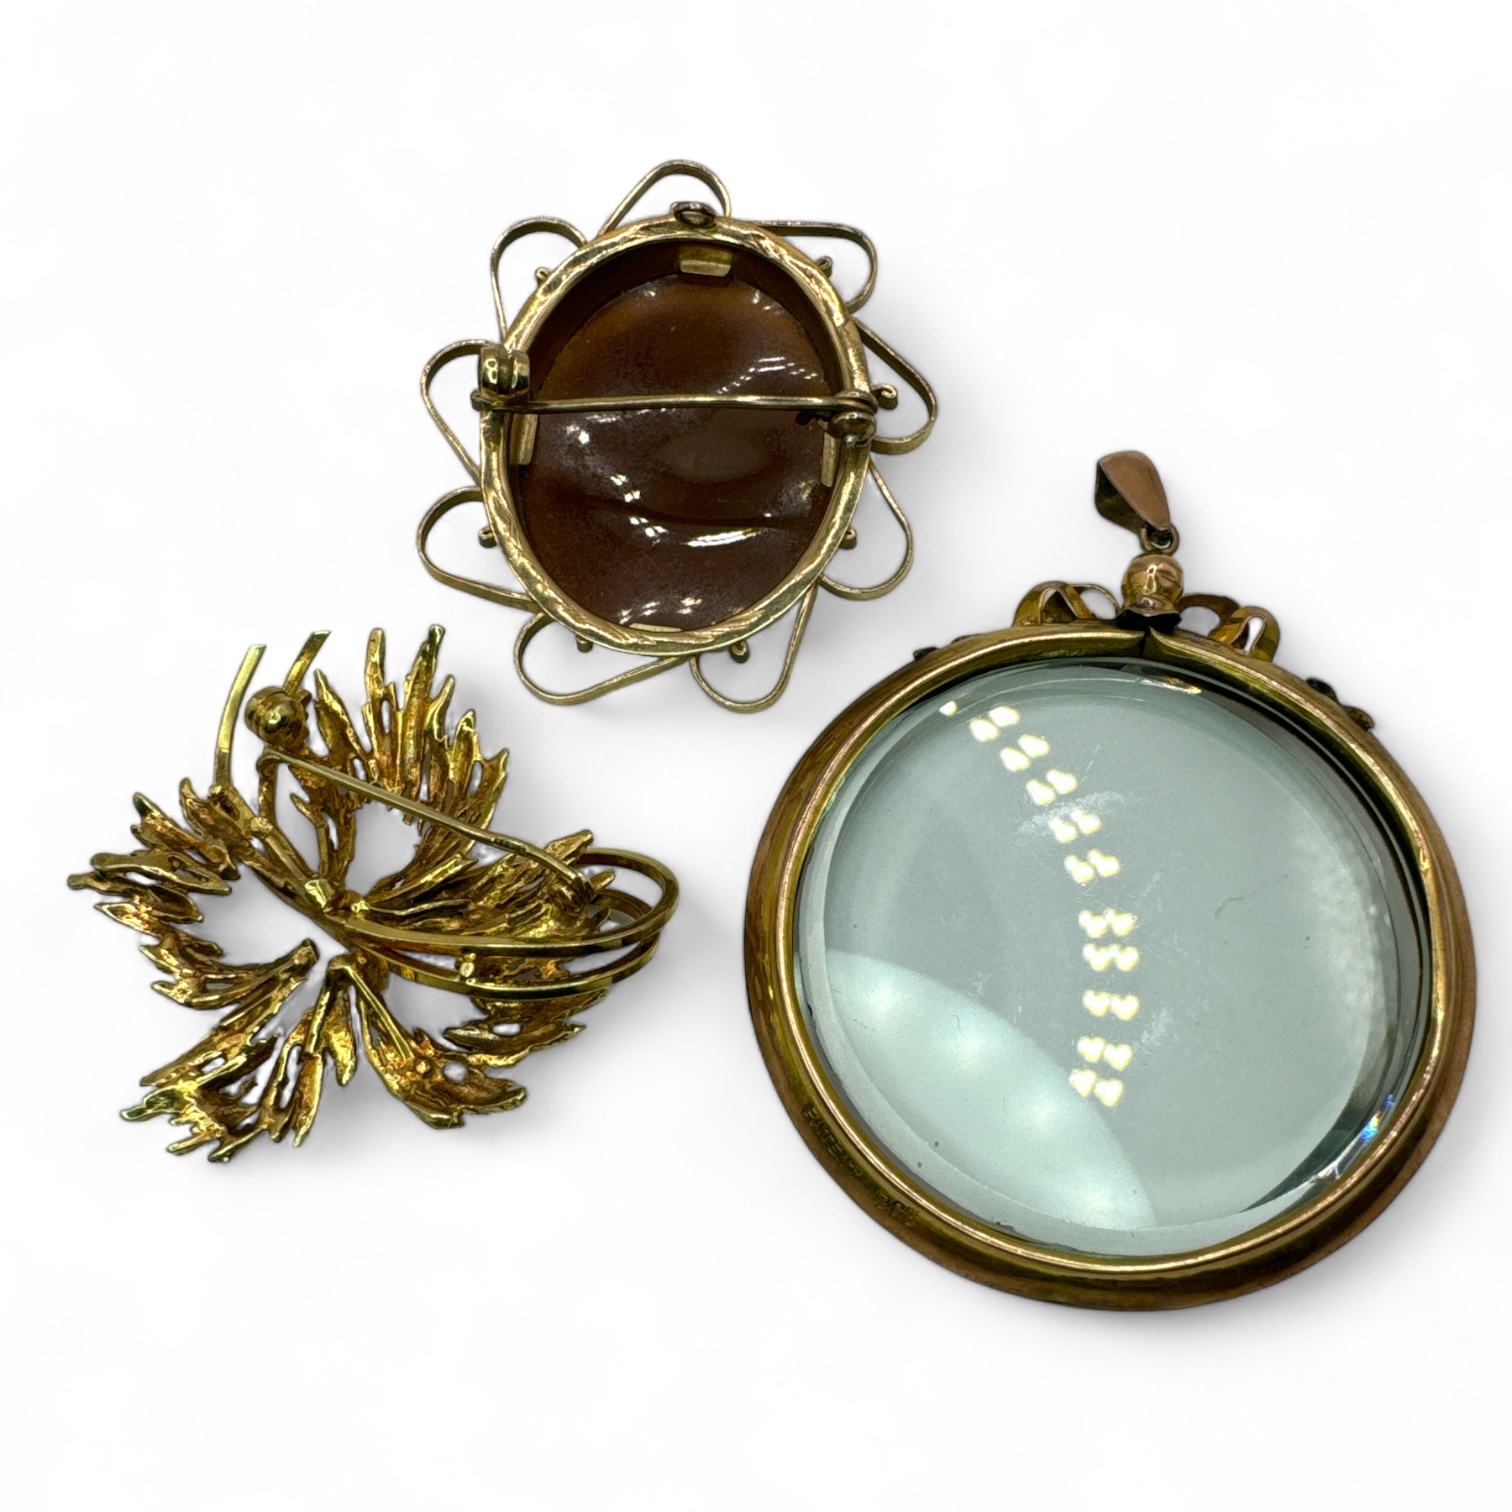 A 9ct yellow gold cameo brooch, depicting the three graces, along with a "9ct" stamped open locket - Bild 2 aus 2